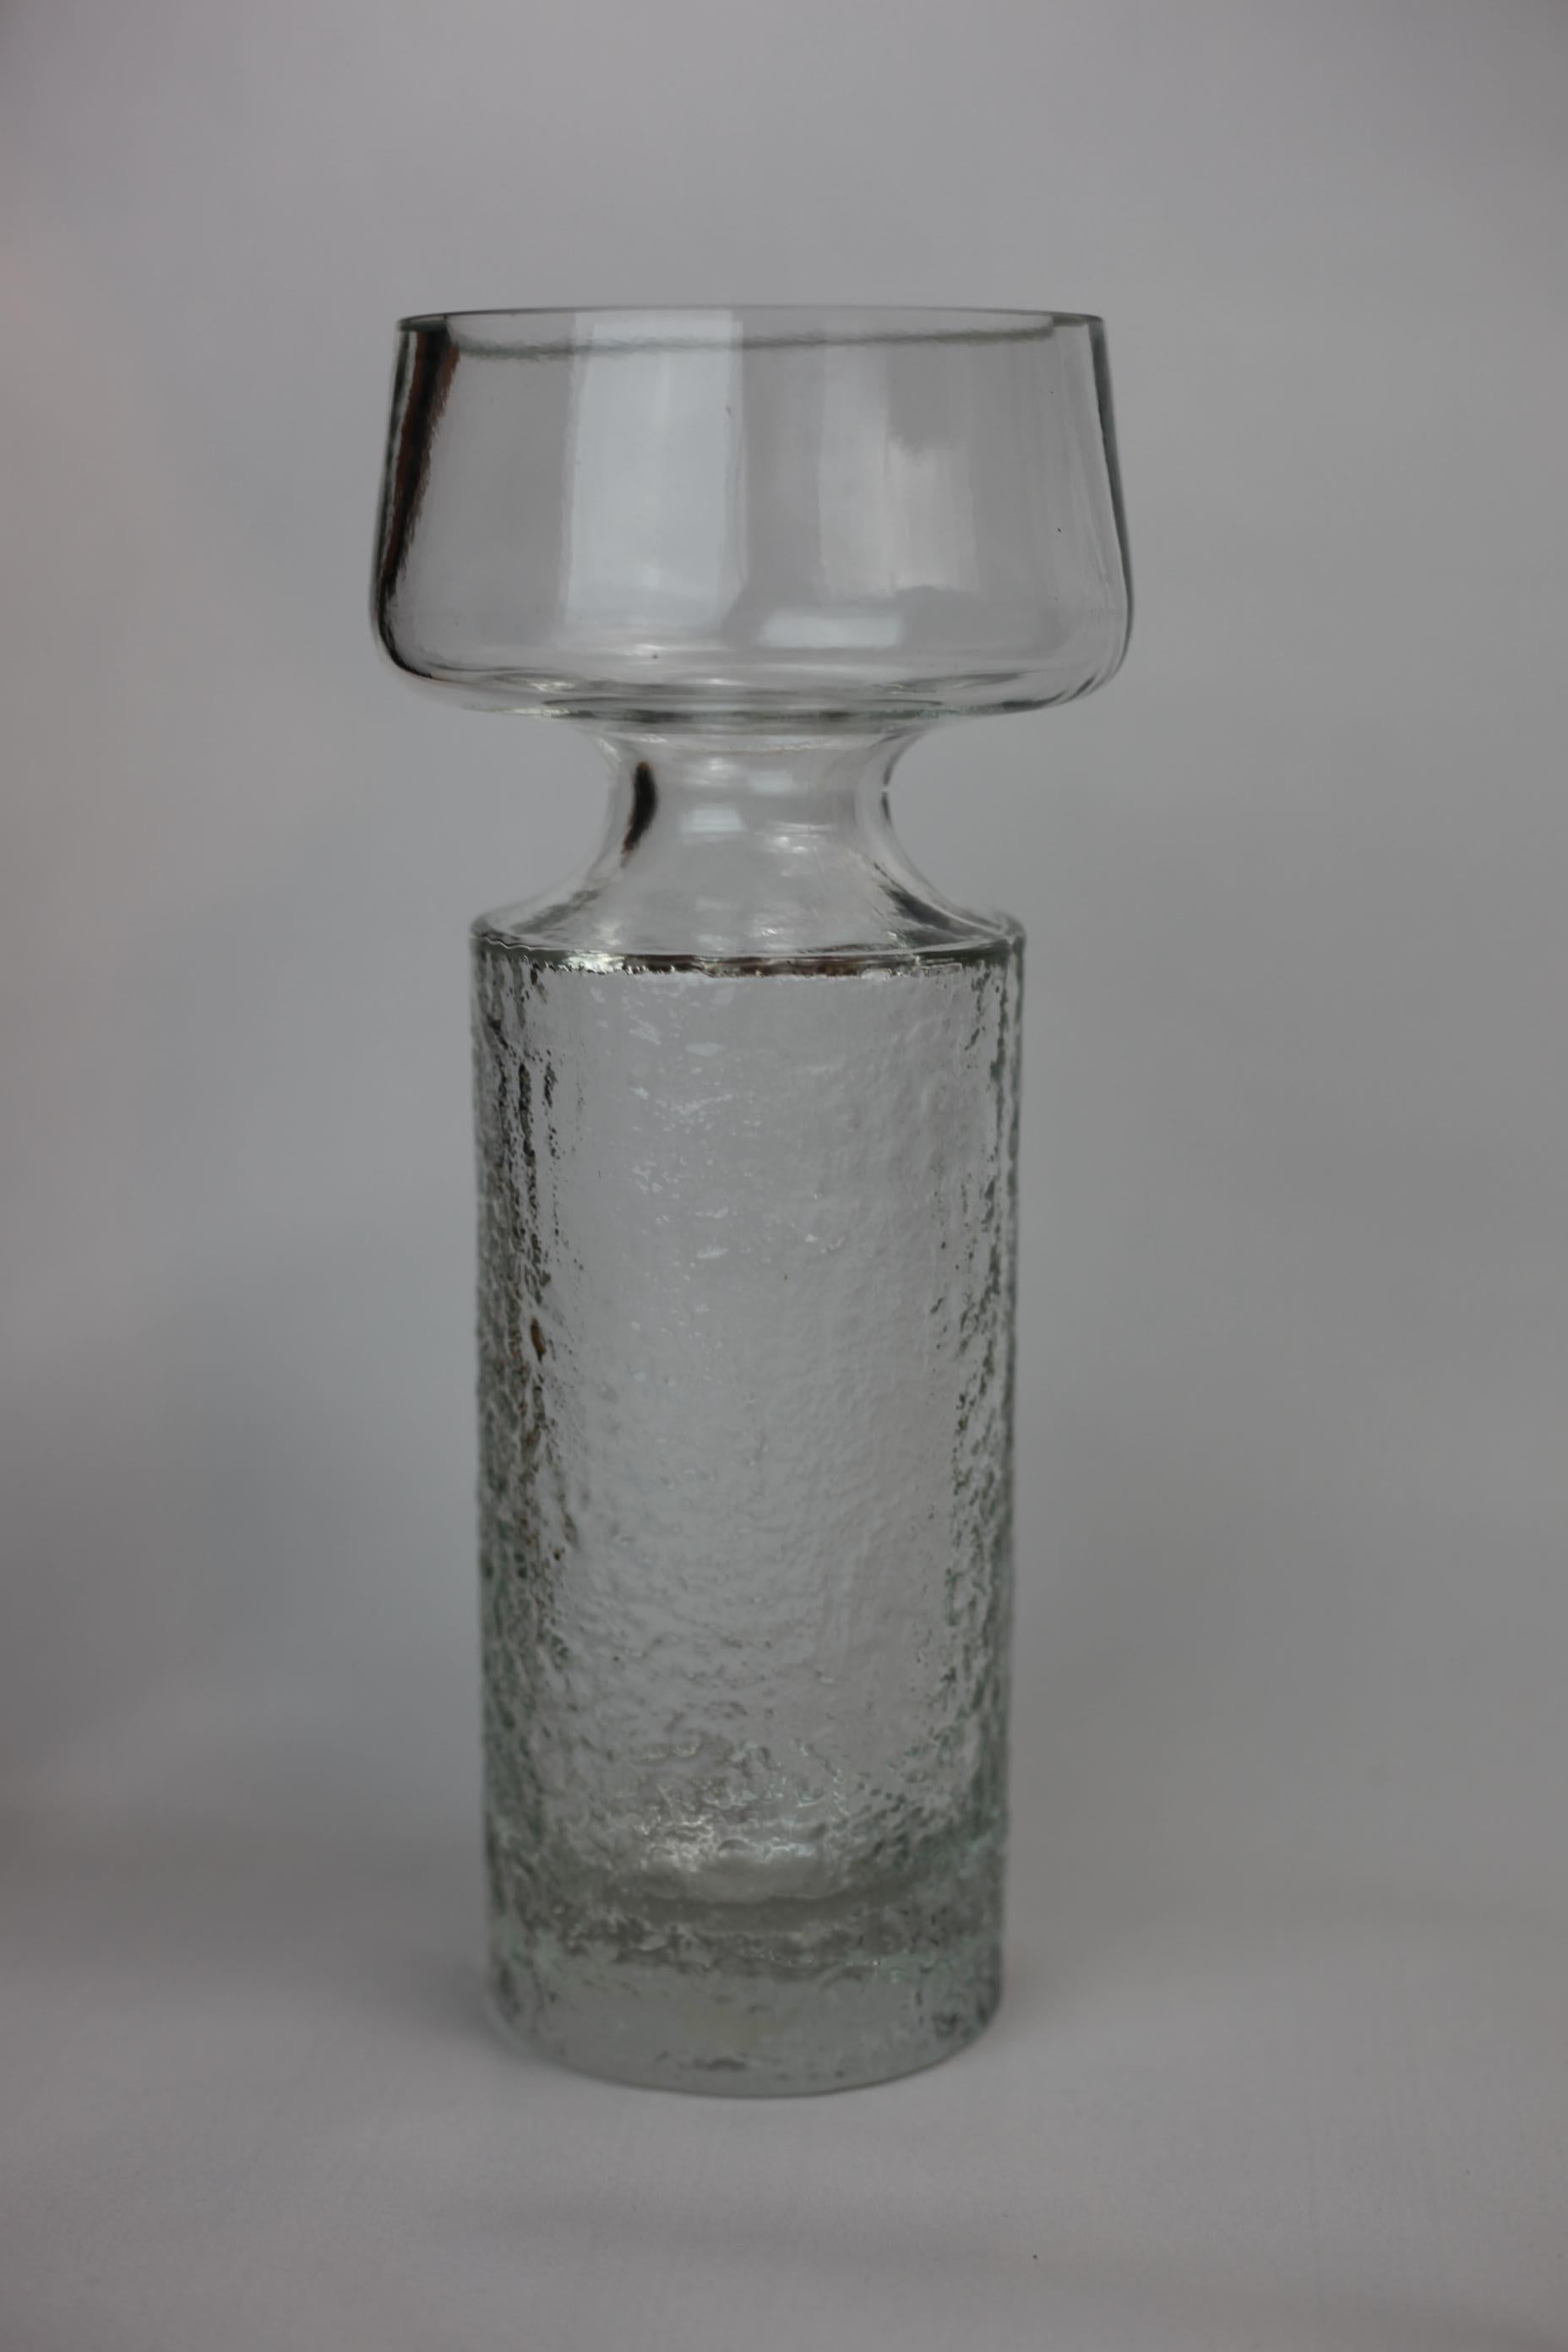 Exquisite Frosted mold blown Riihimäen Lasi Safari vase by Tamara Aladin for Riihimäen Lasi or Riihimaki of Finland. Ice clear top and frosted textured bottom.
This heavy glass Vase, model # 1495 was produced from 1968 to 1974. In very good